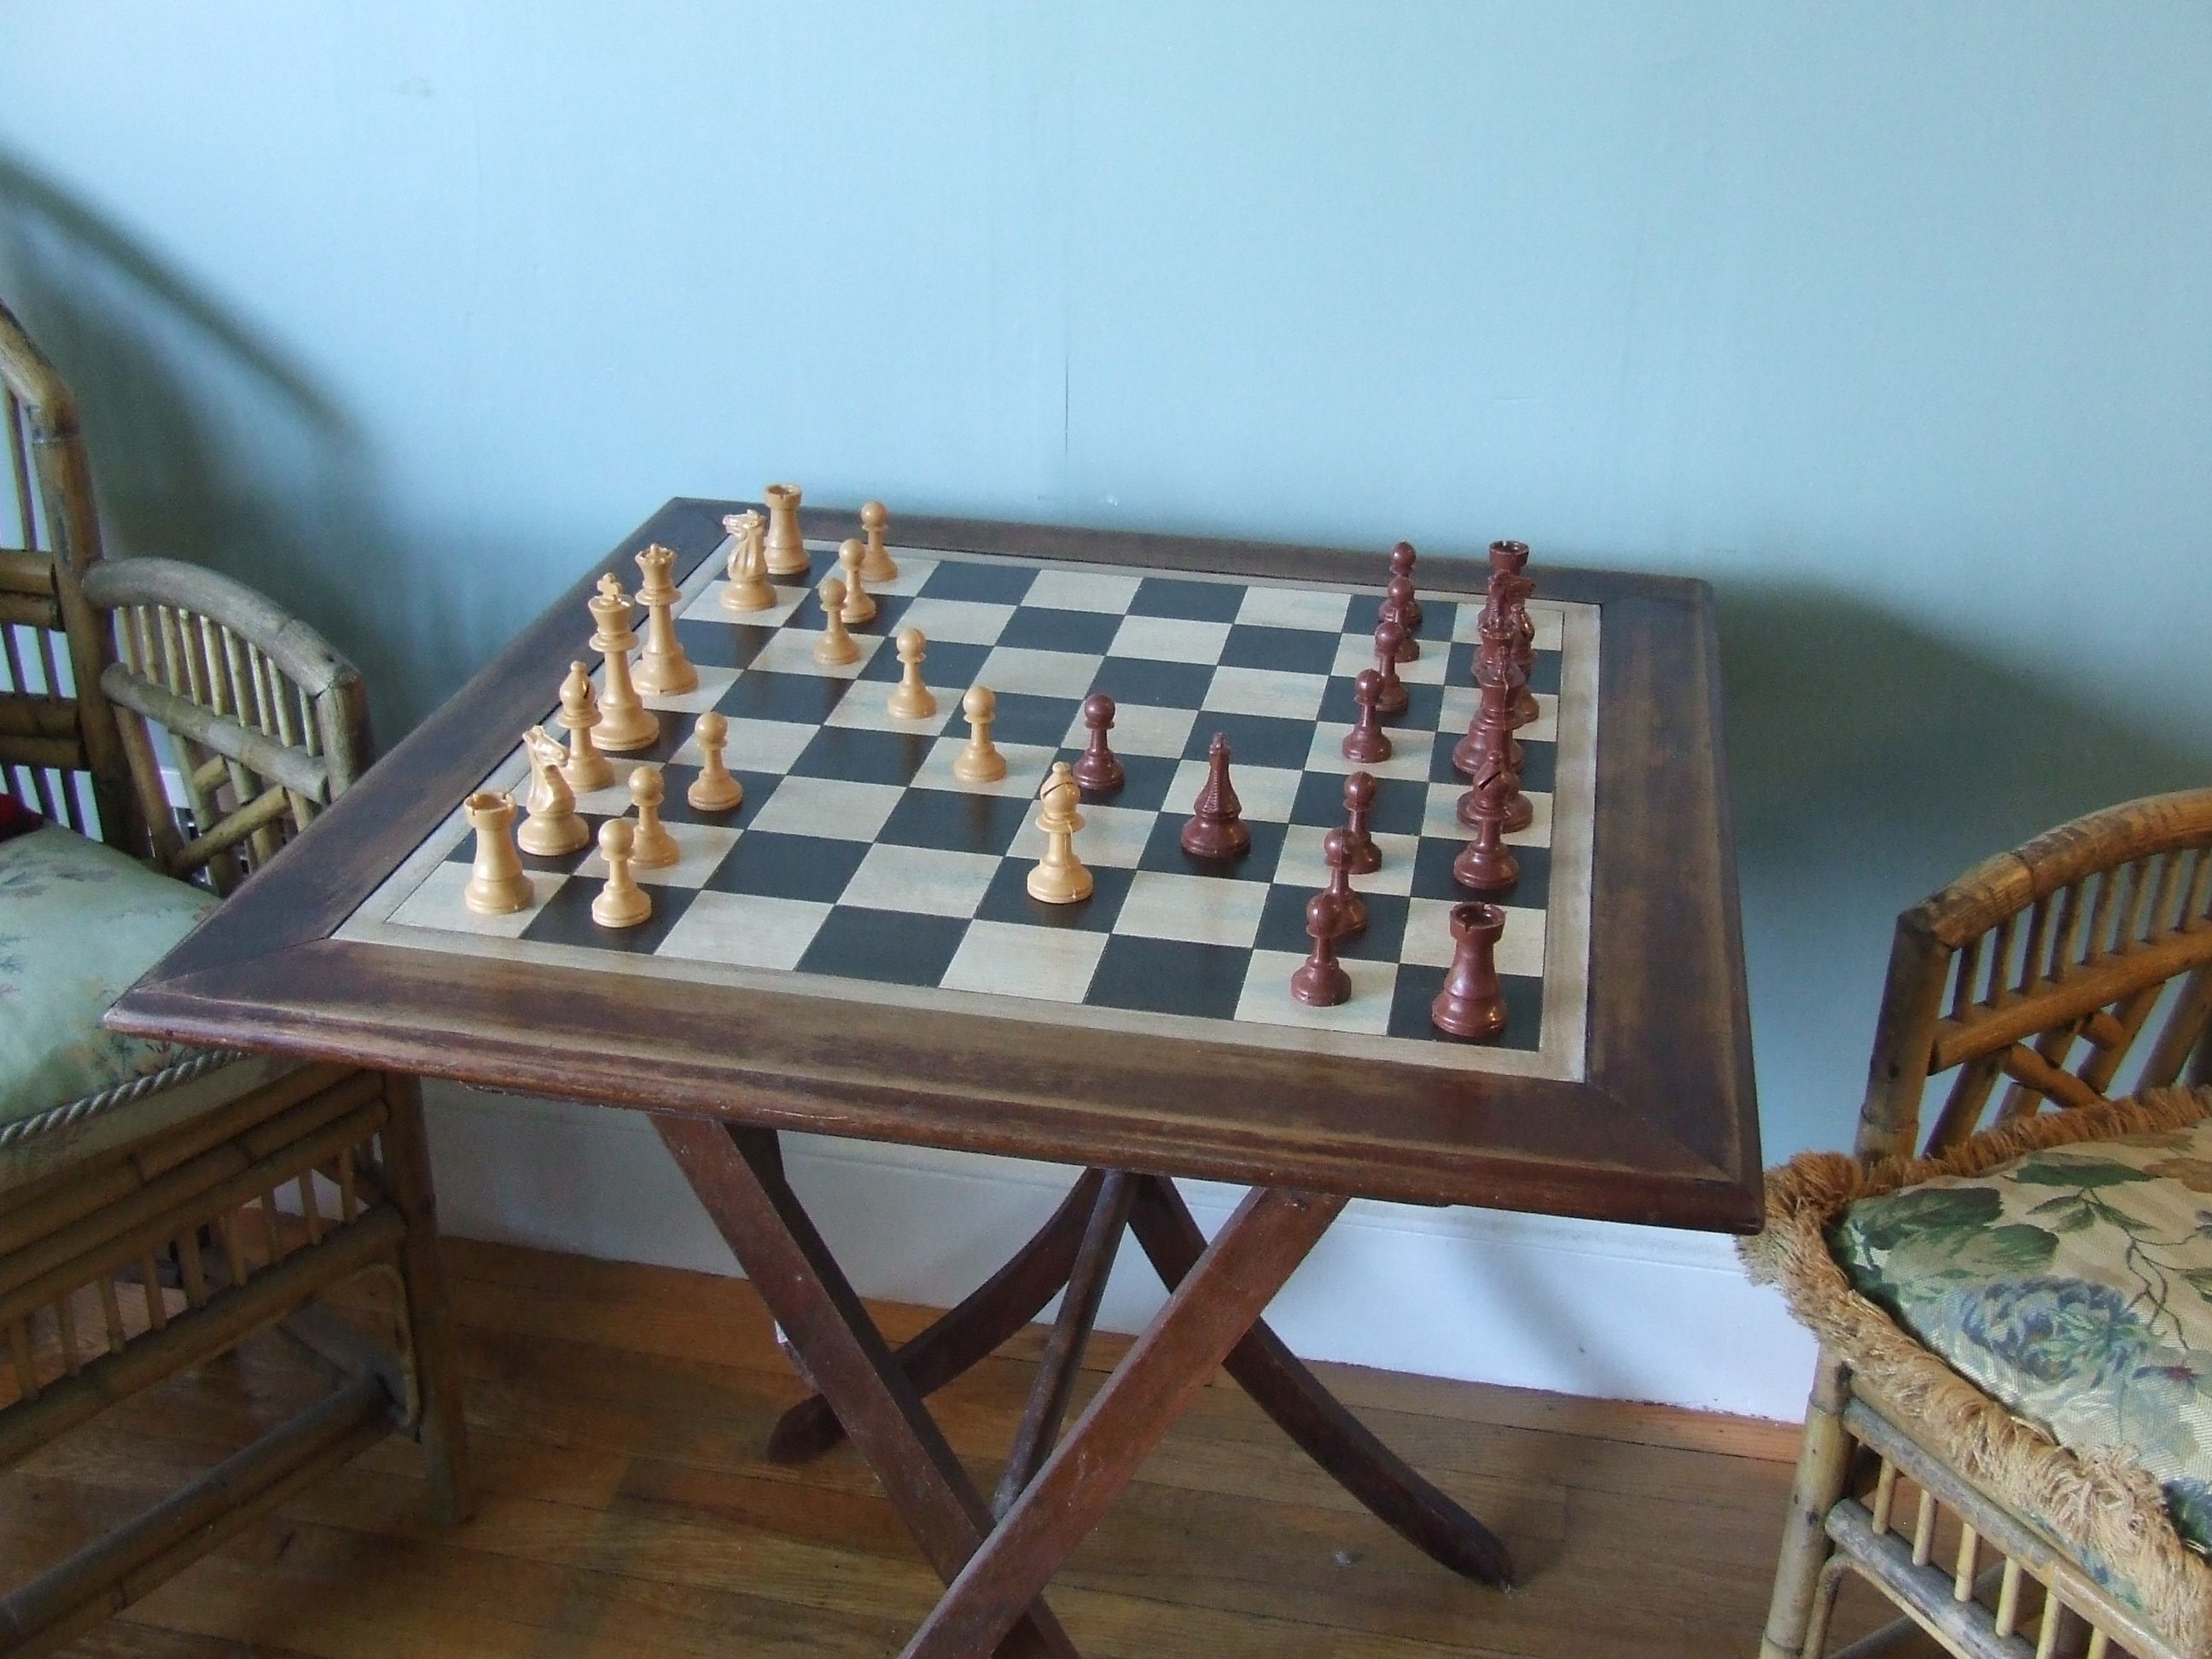 Custom Upcycled Folding Chess Table by Banksville79 | CustomMade.com